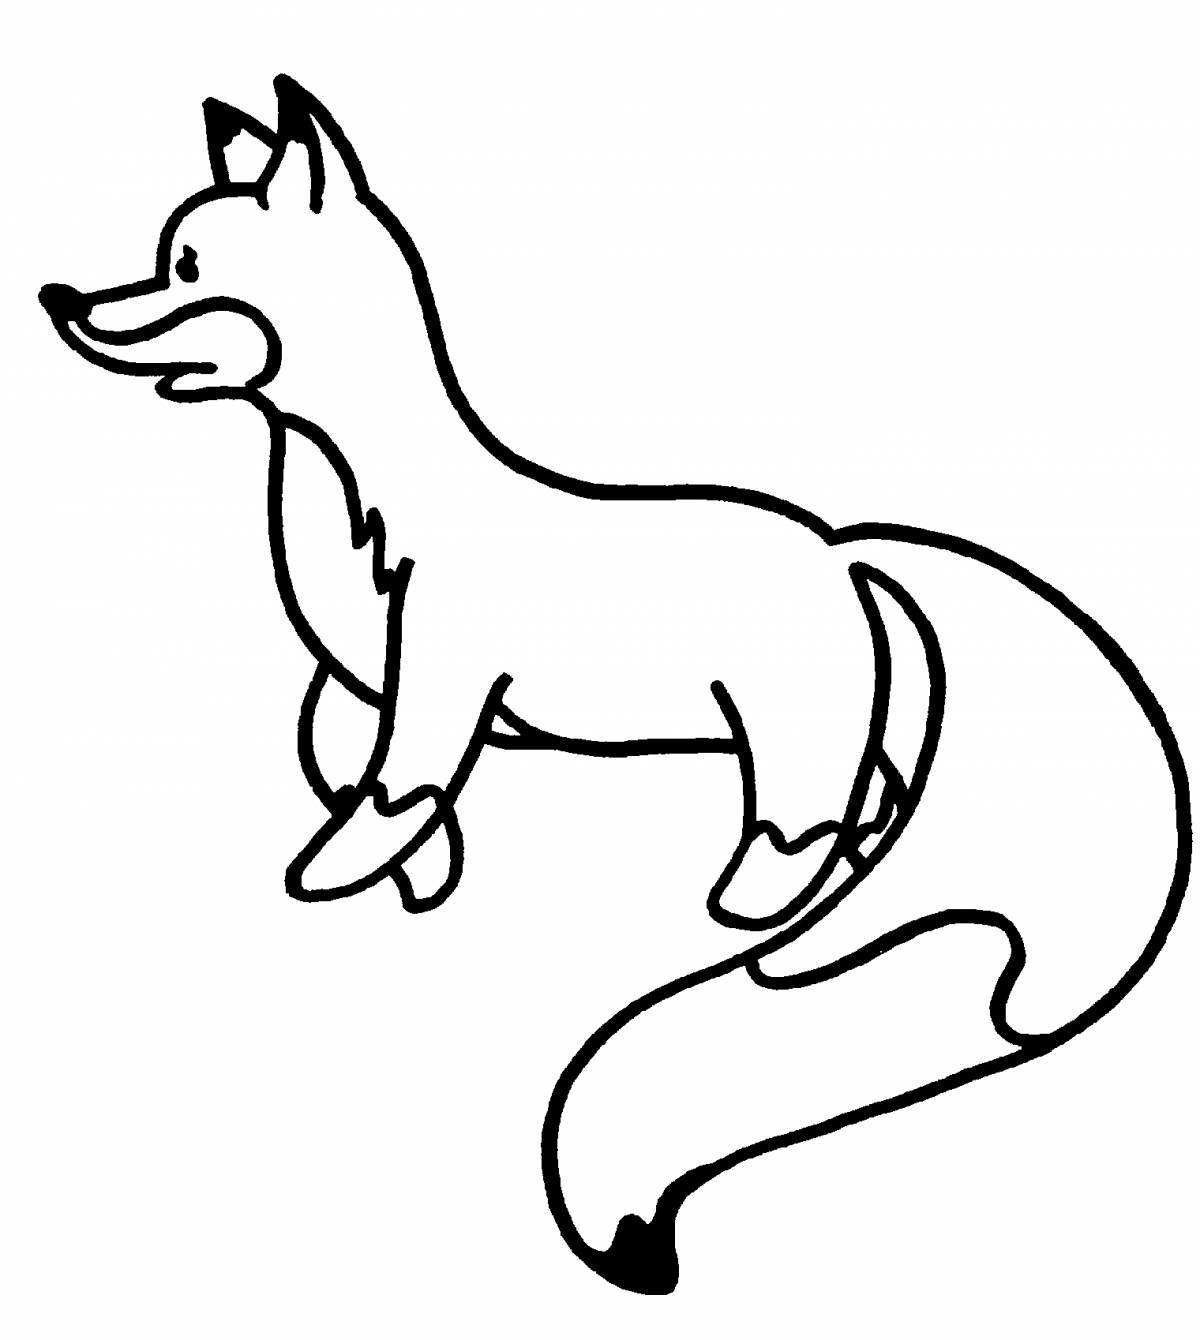 Charming fox coloring book